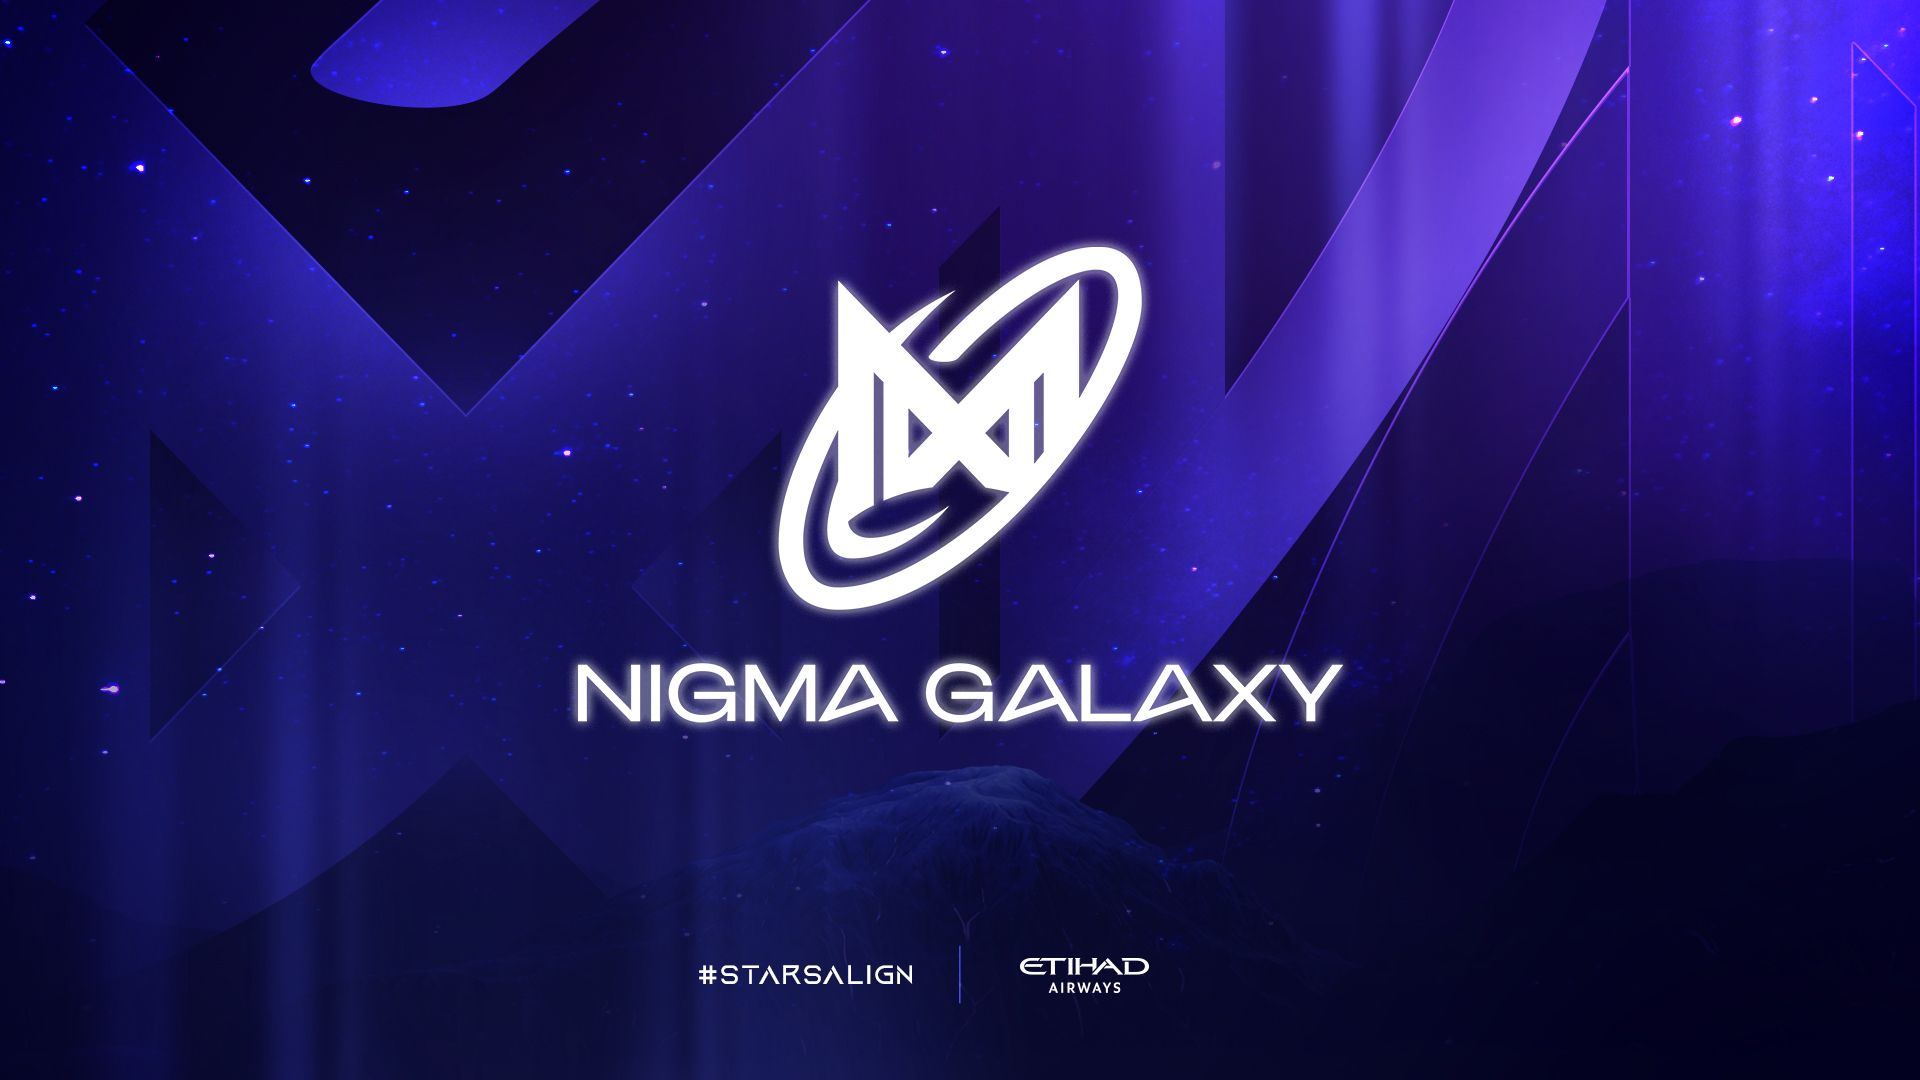 What Are the Upcoming Tournaments Nigma Galaxy is Preparing for?